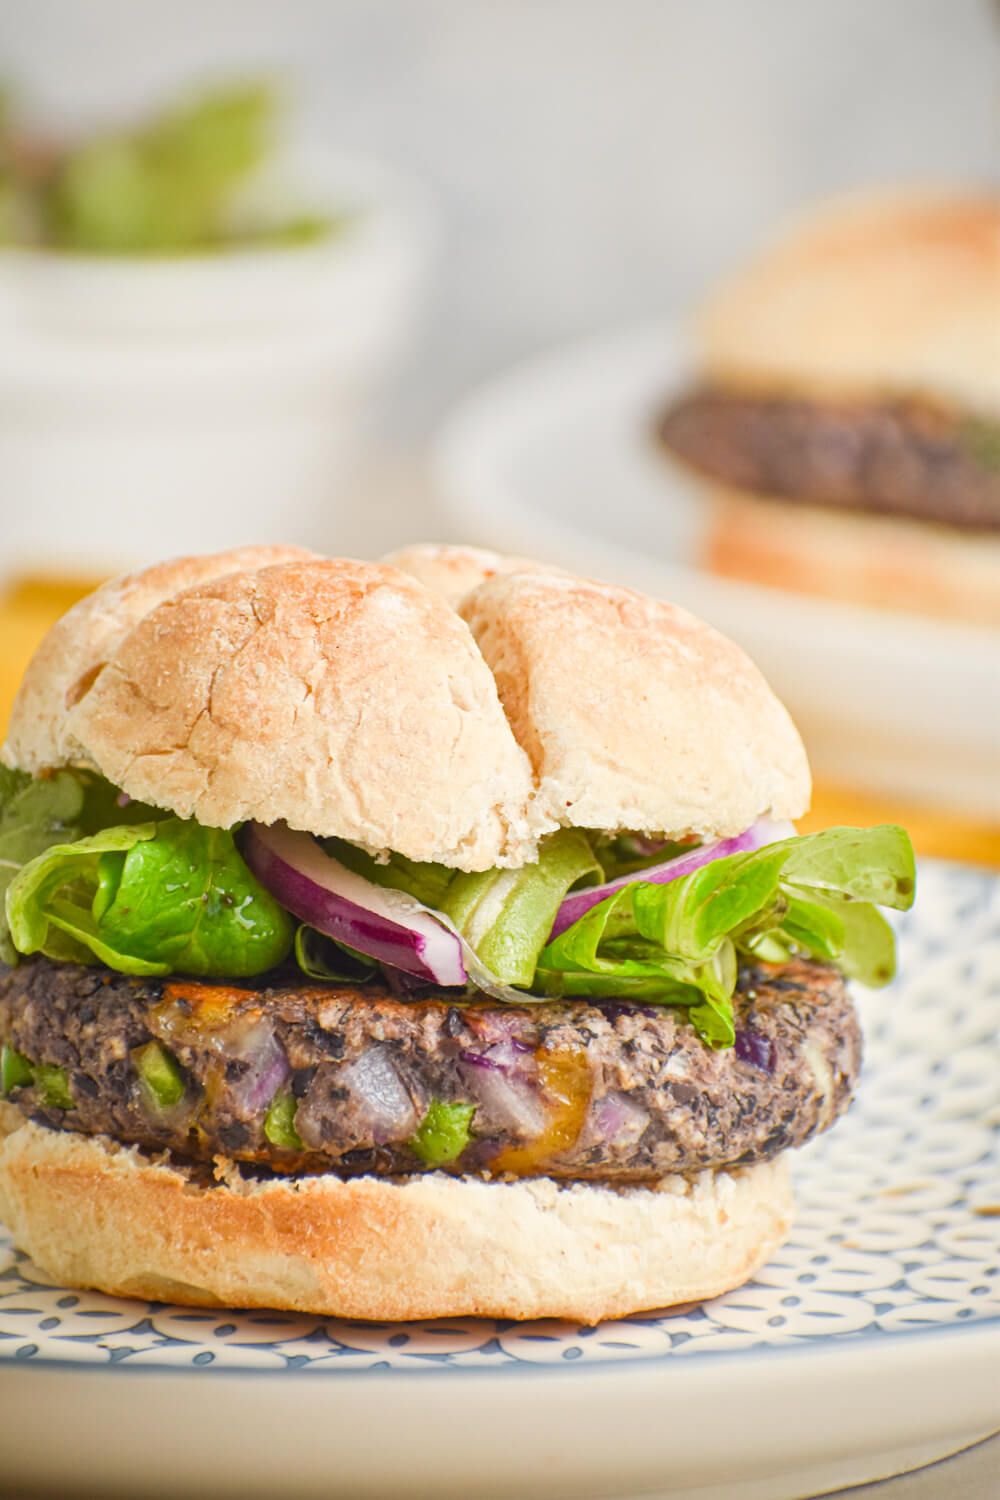 Black bean burgers with jalapenos and cheddar cheese on a bun with lettuce and onions.